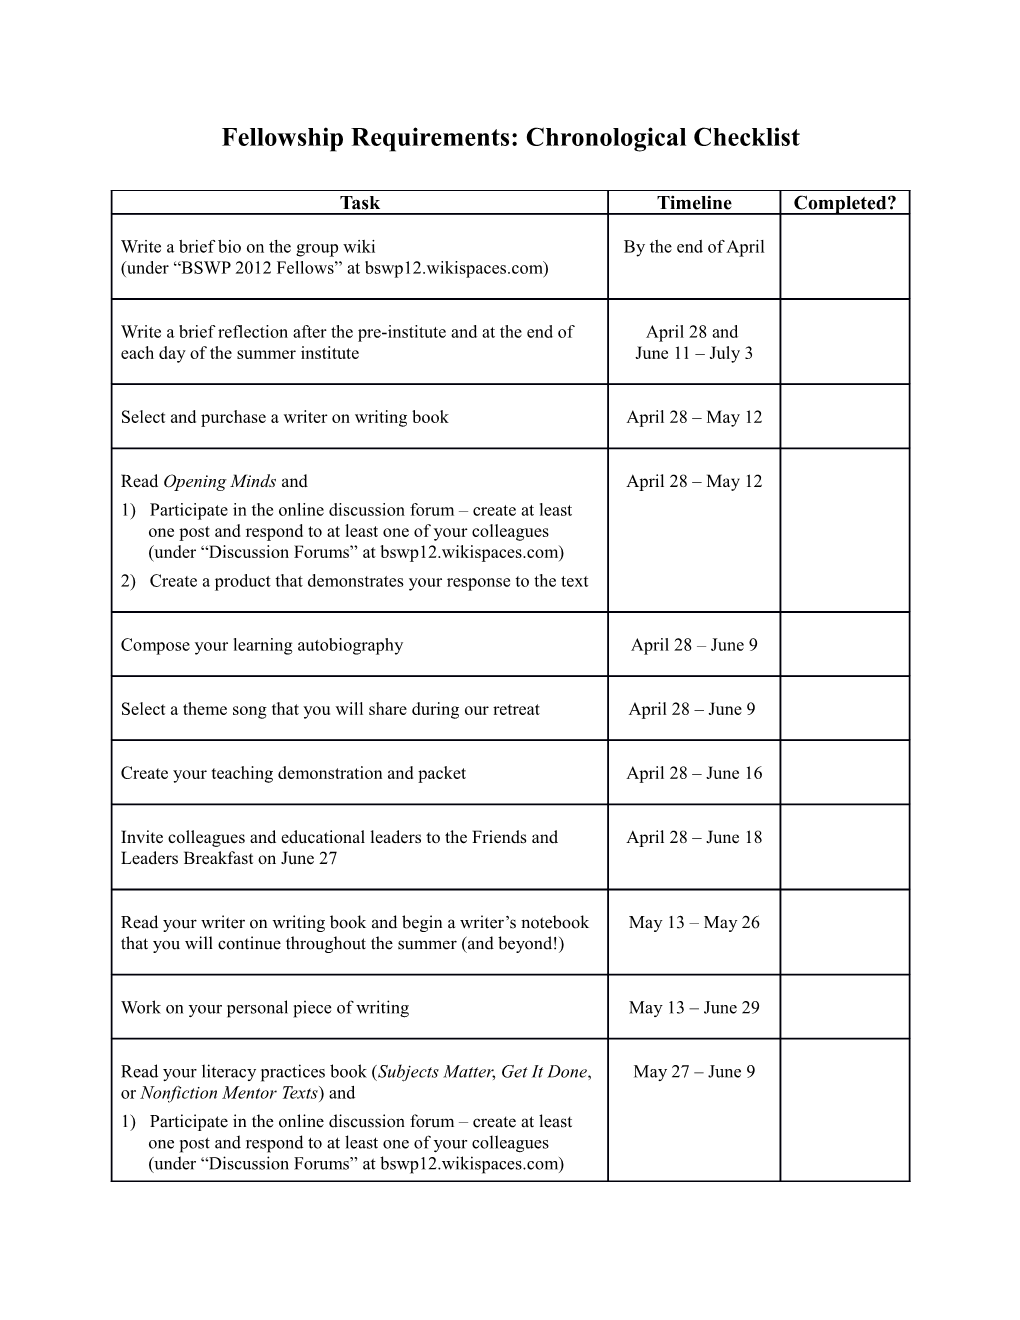 Fellowship Requirements: Chronological Checklist